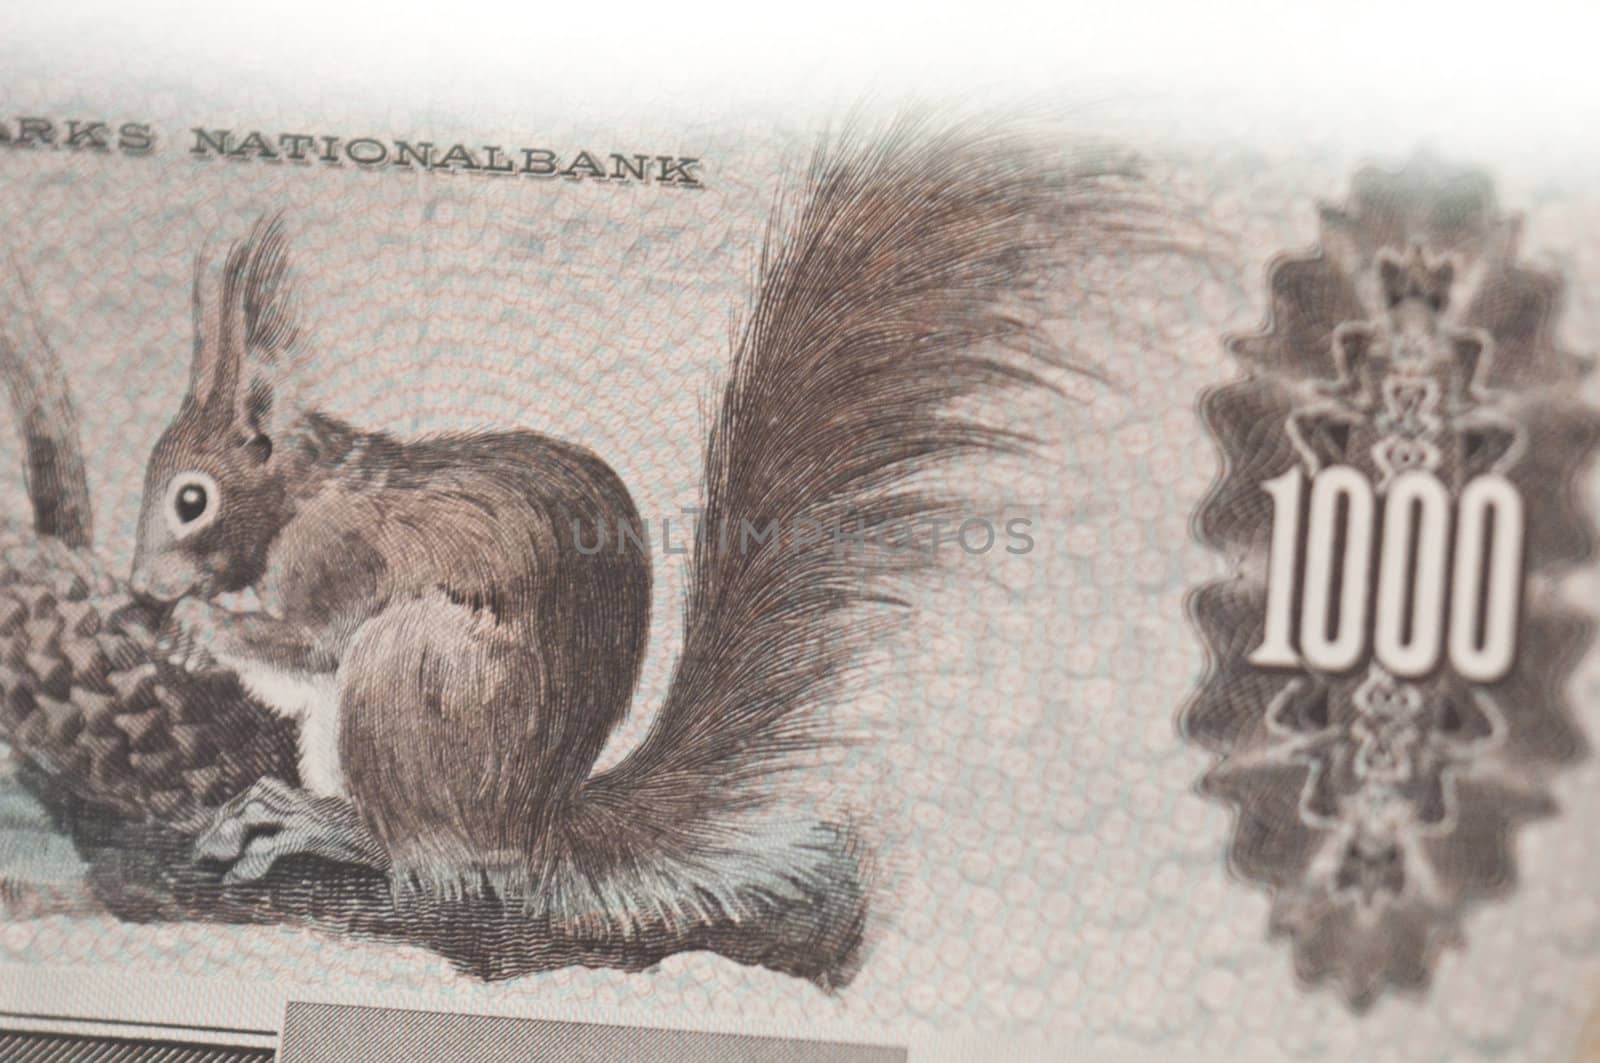 Out of circulation Danish currency